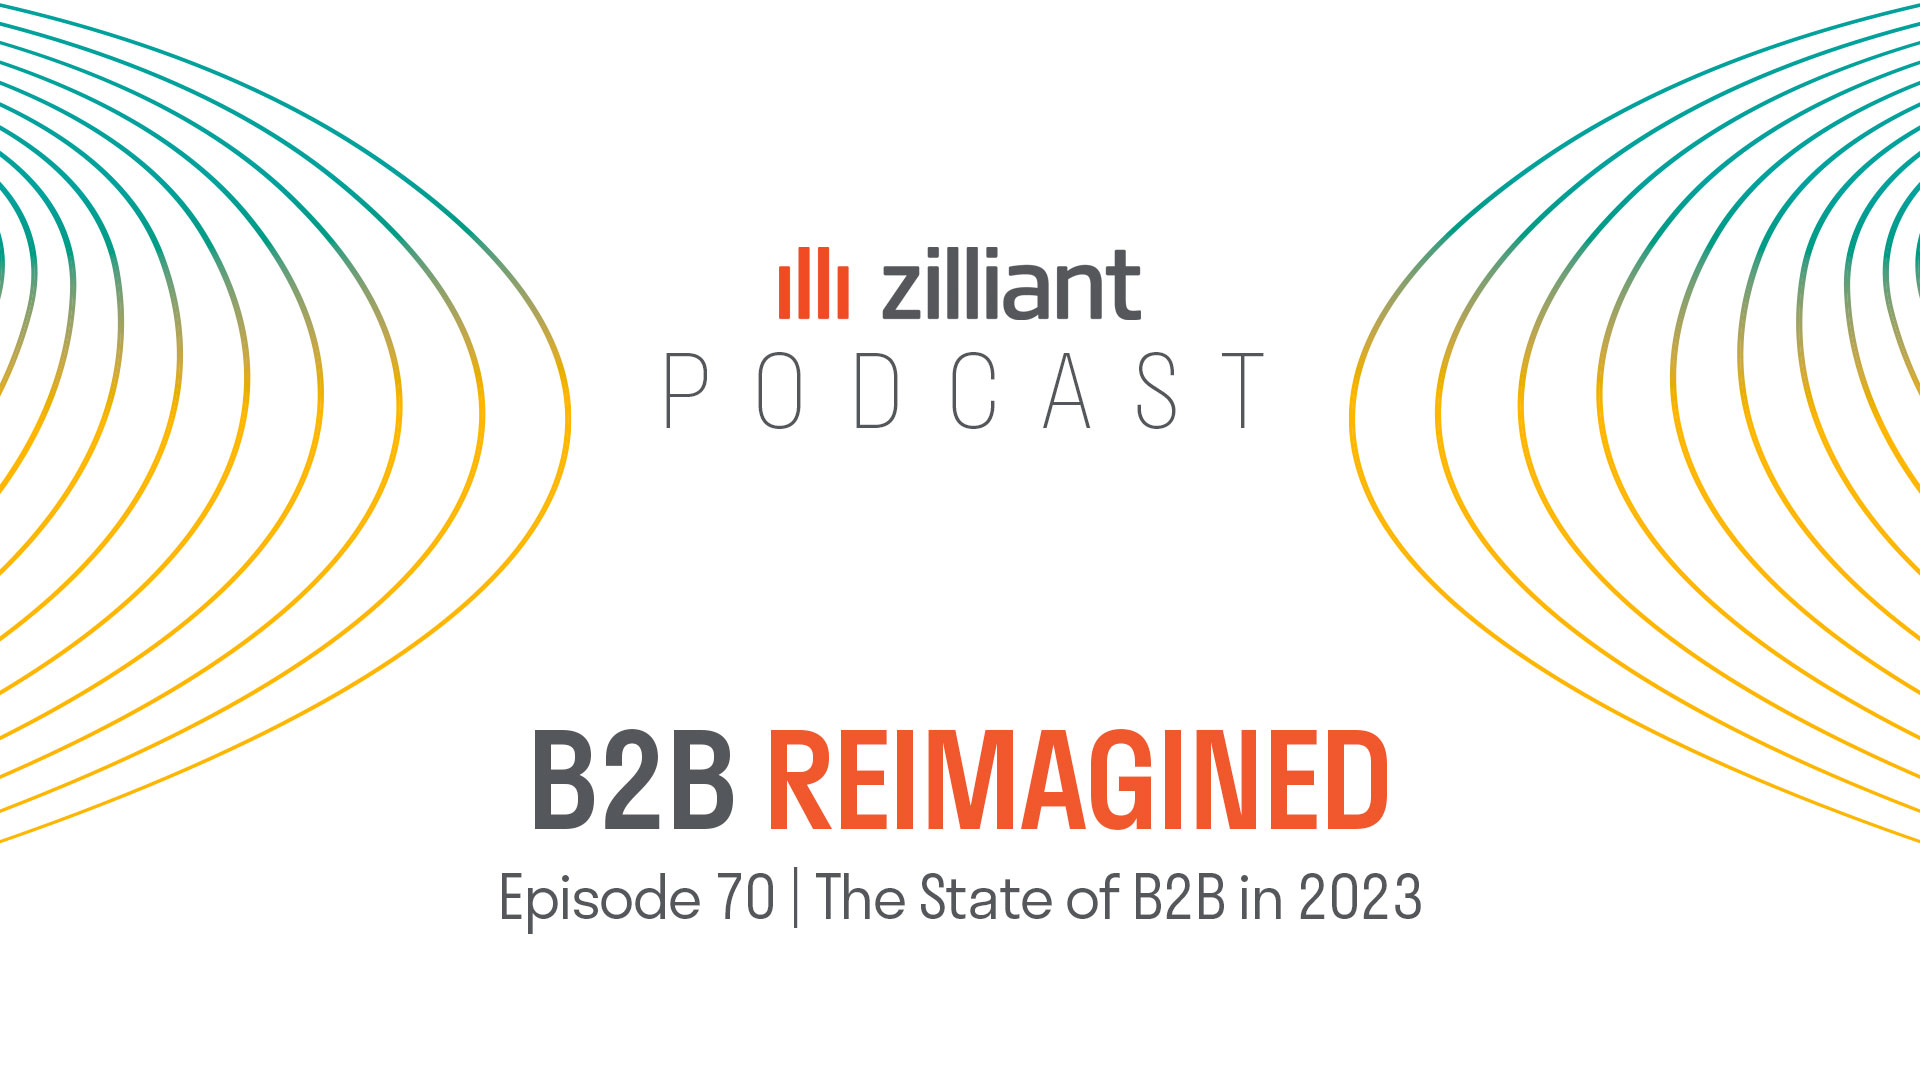 The State of B2B in 2023